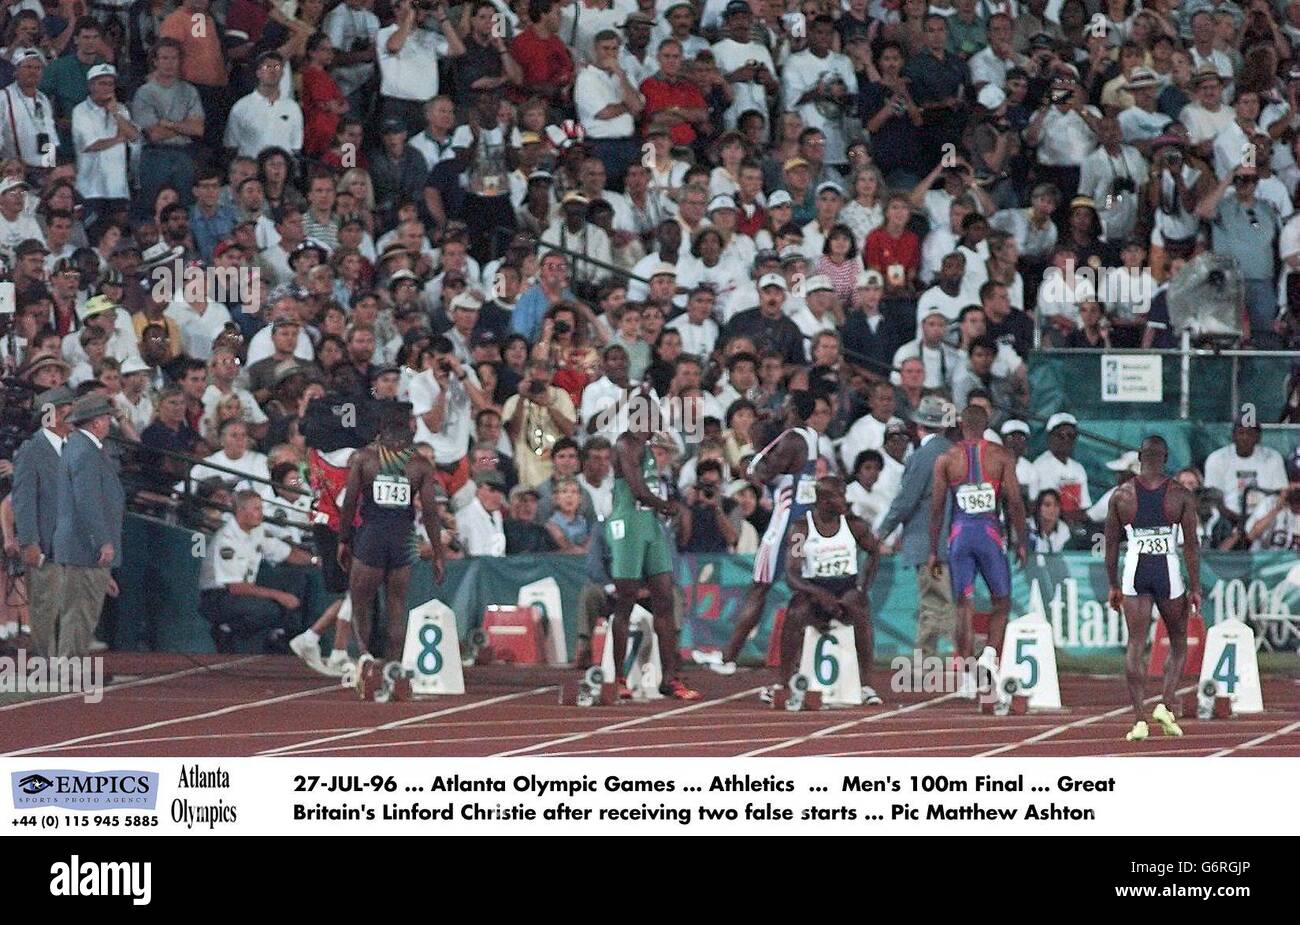 27-JUL-96 ... Atlanta Olympic Games ... Athletics ... Men's 100m Final ... Great Britain's Linford Christie after receiving two false starts Stock Photo